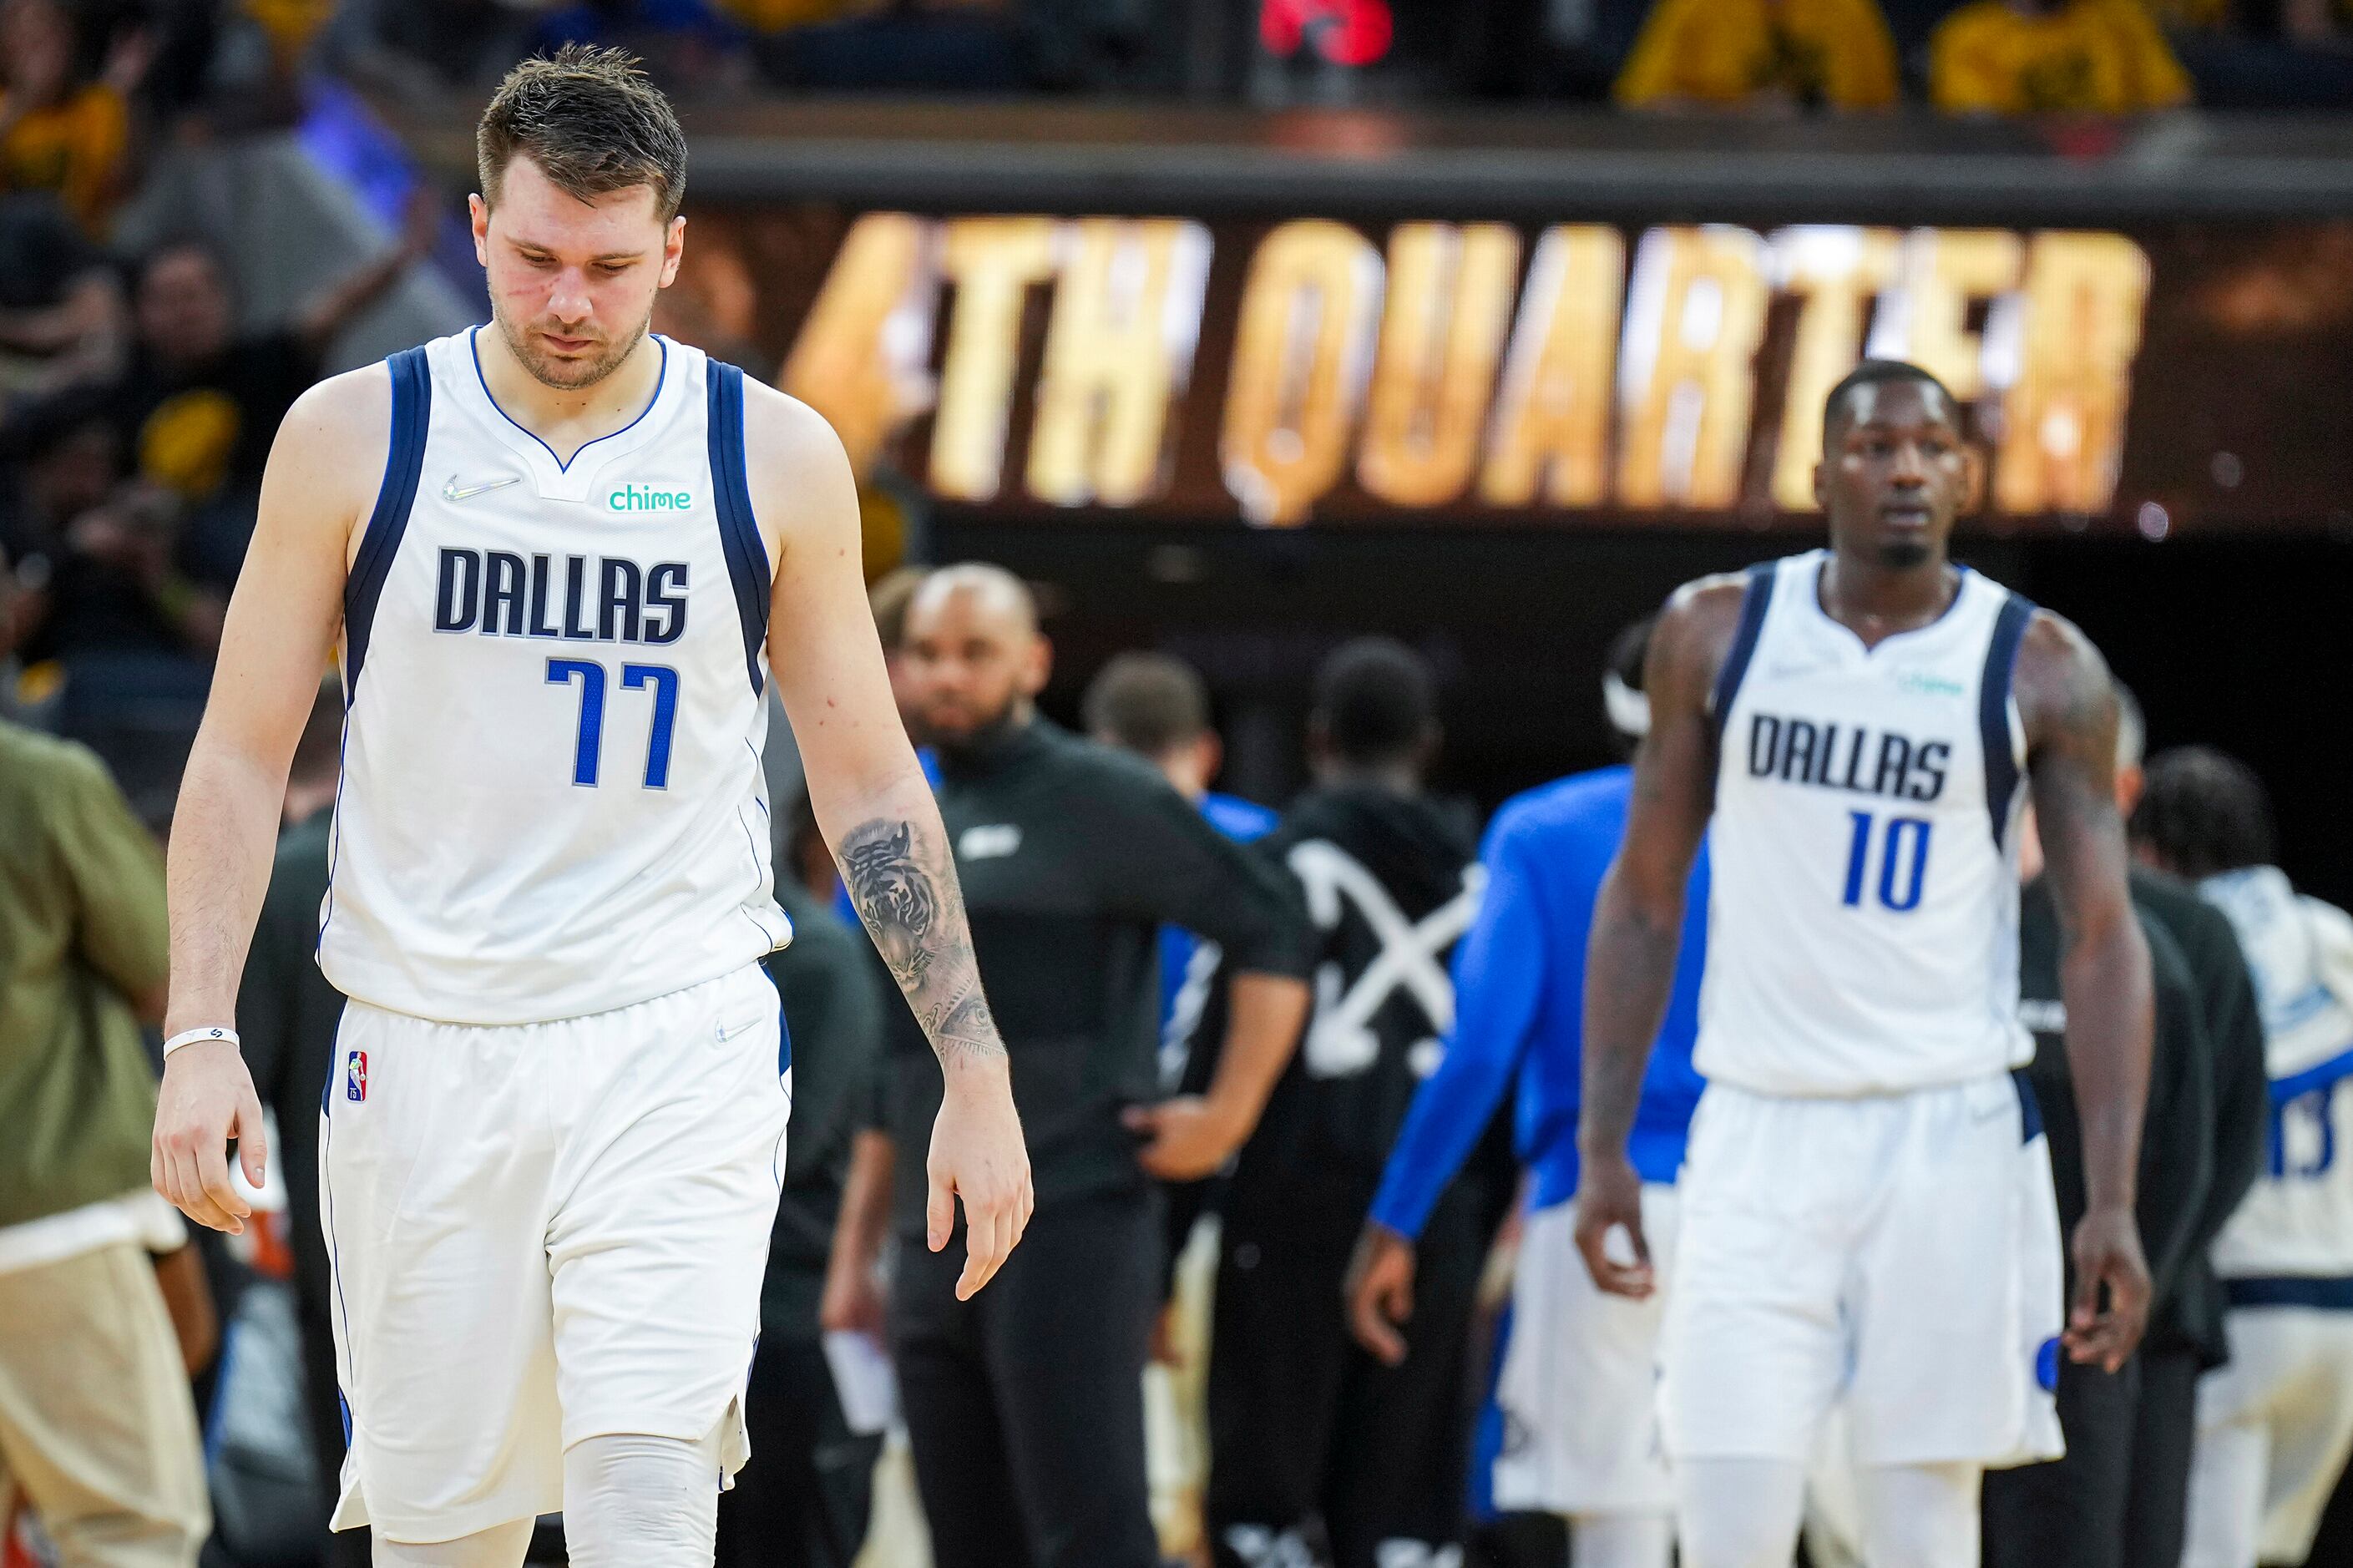 Playoff basketball is back in Dallas, and so are big crowds - Mavs